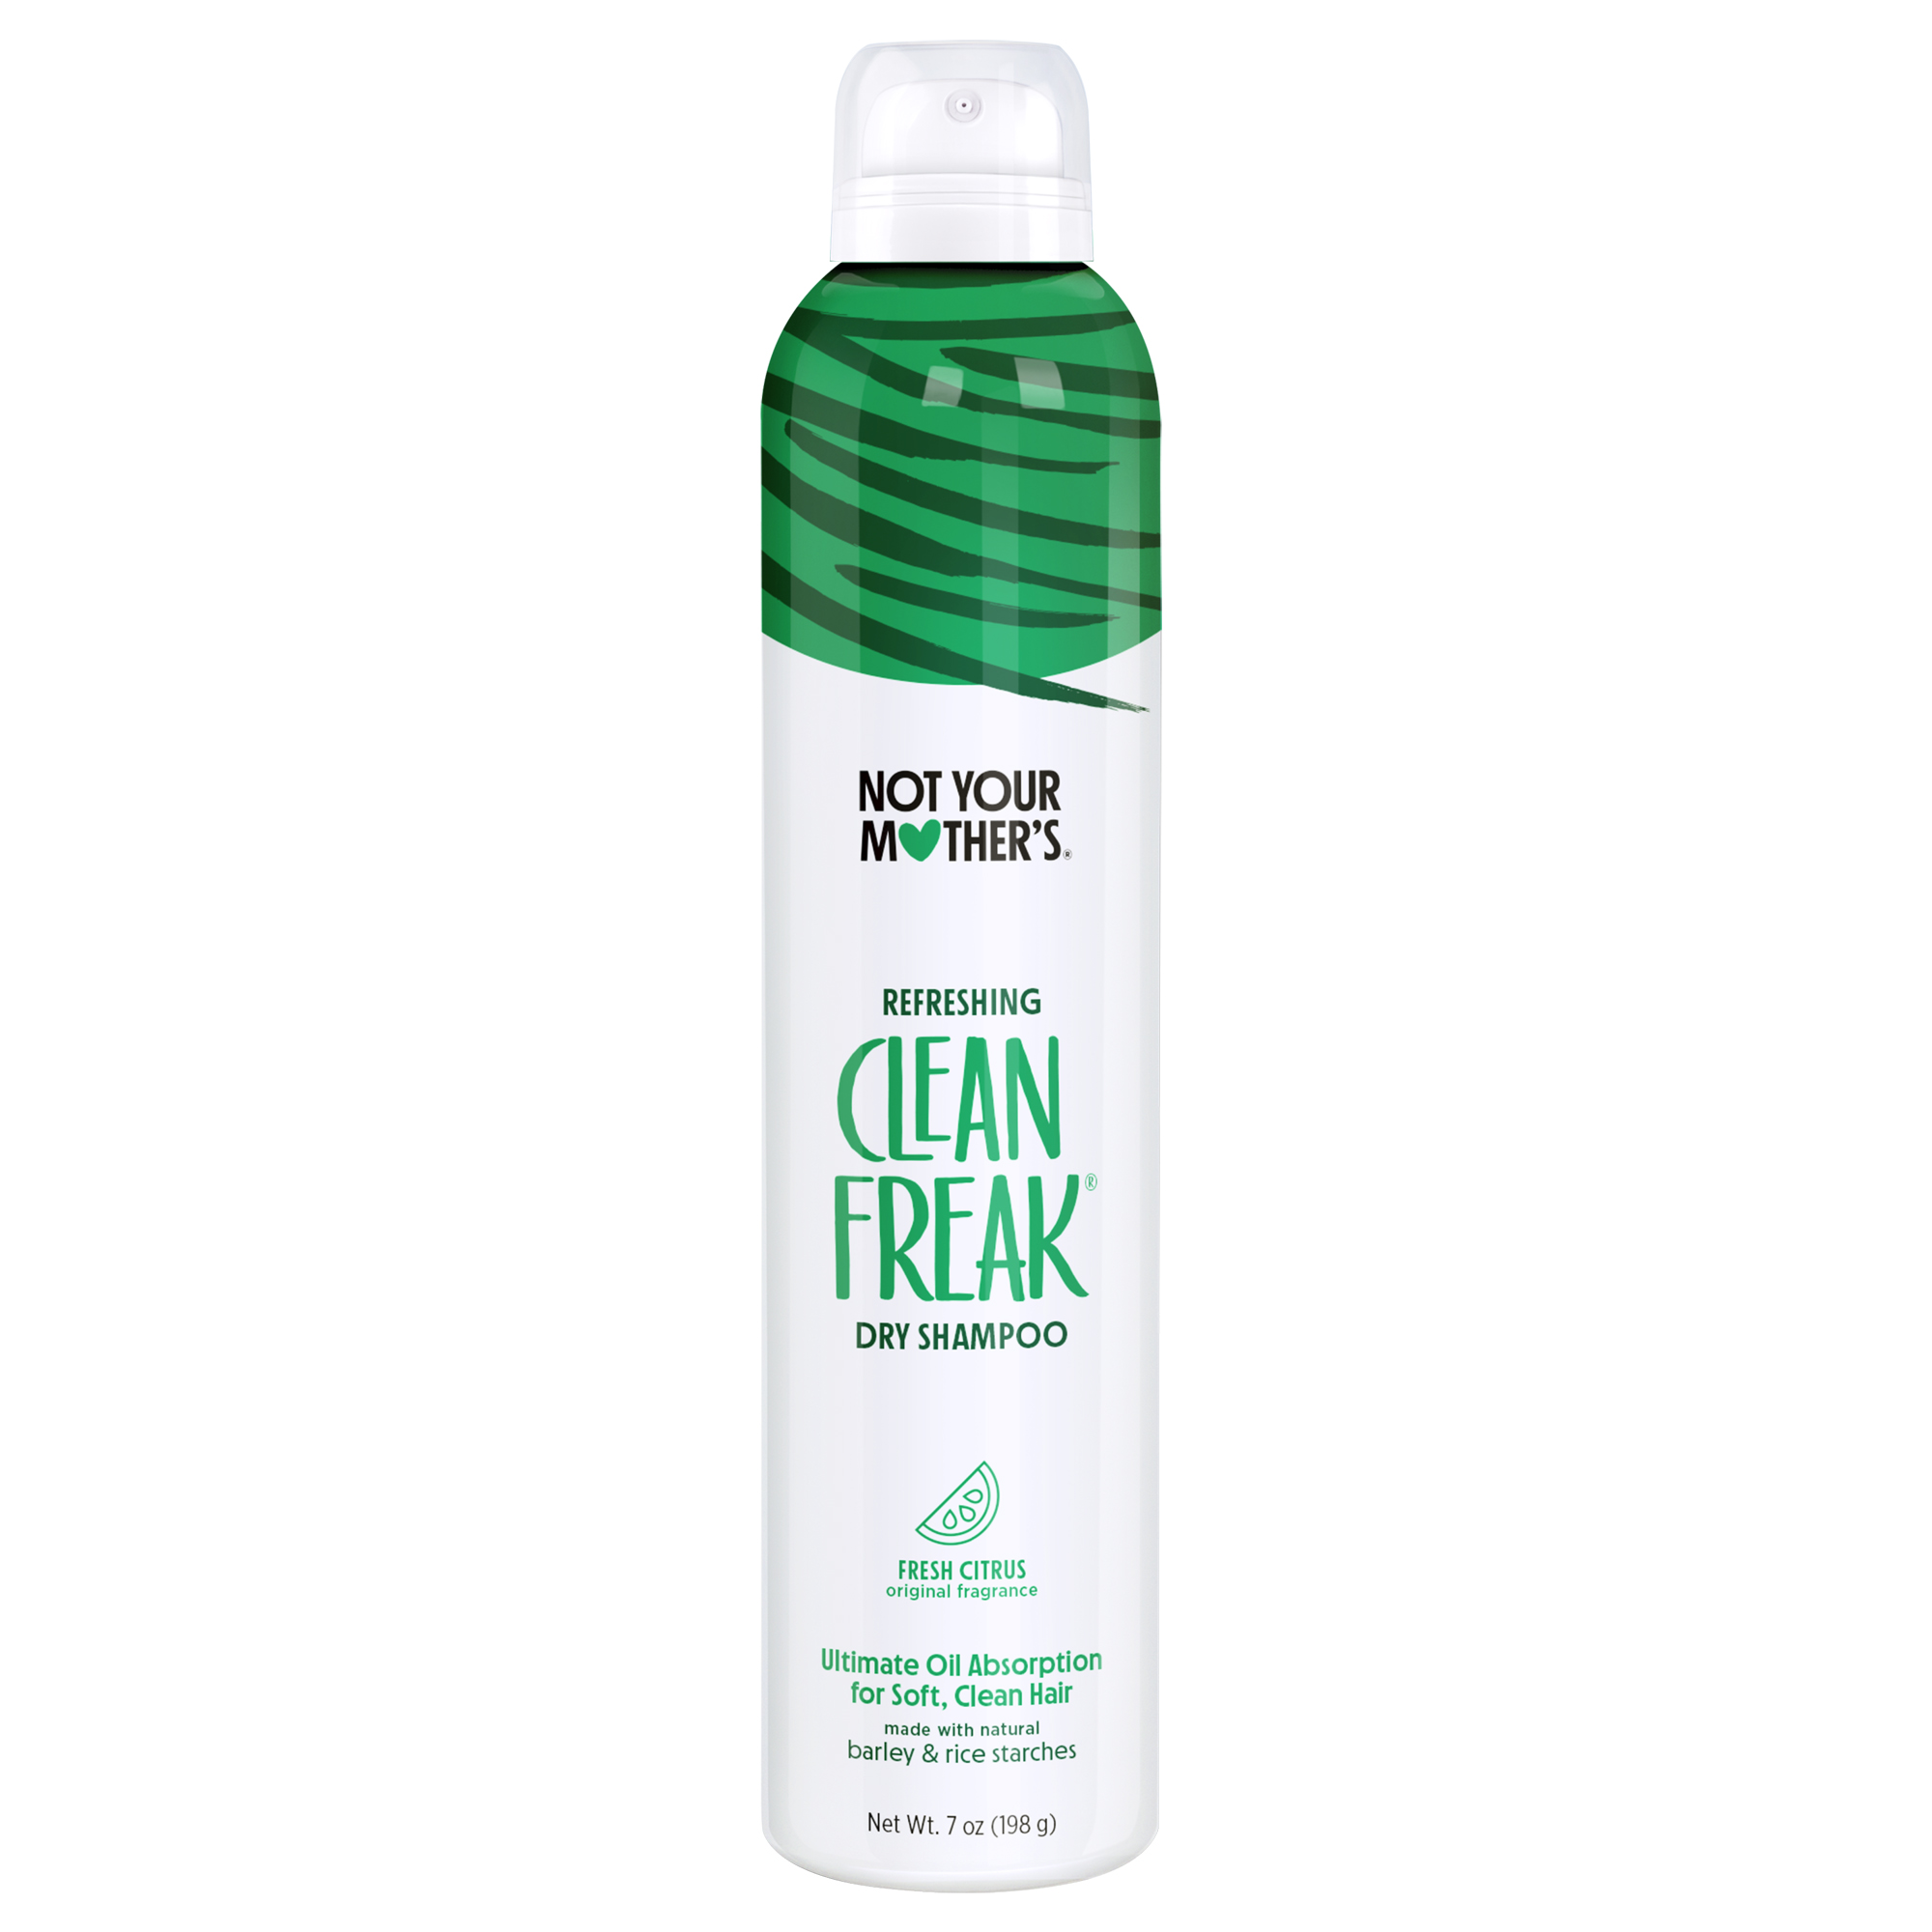 Not Your Mother's Clean Freak Refreshing Dry Shampoo, 7 oz - image 1 of 10